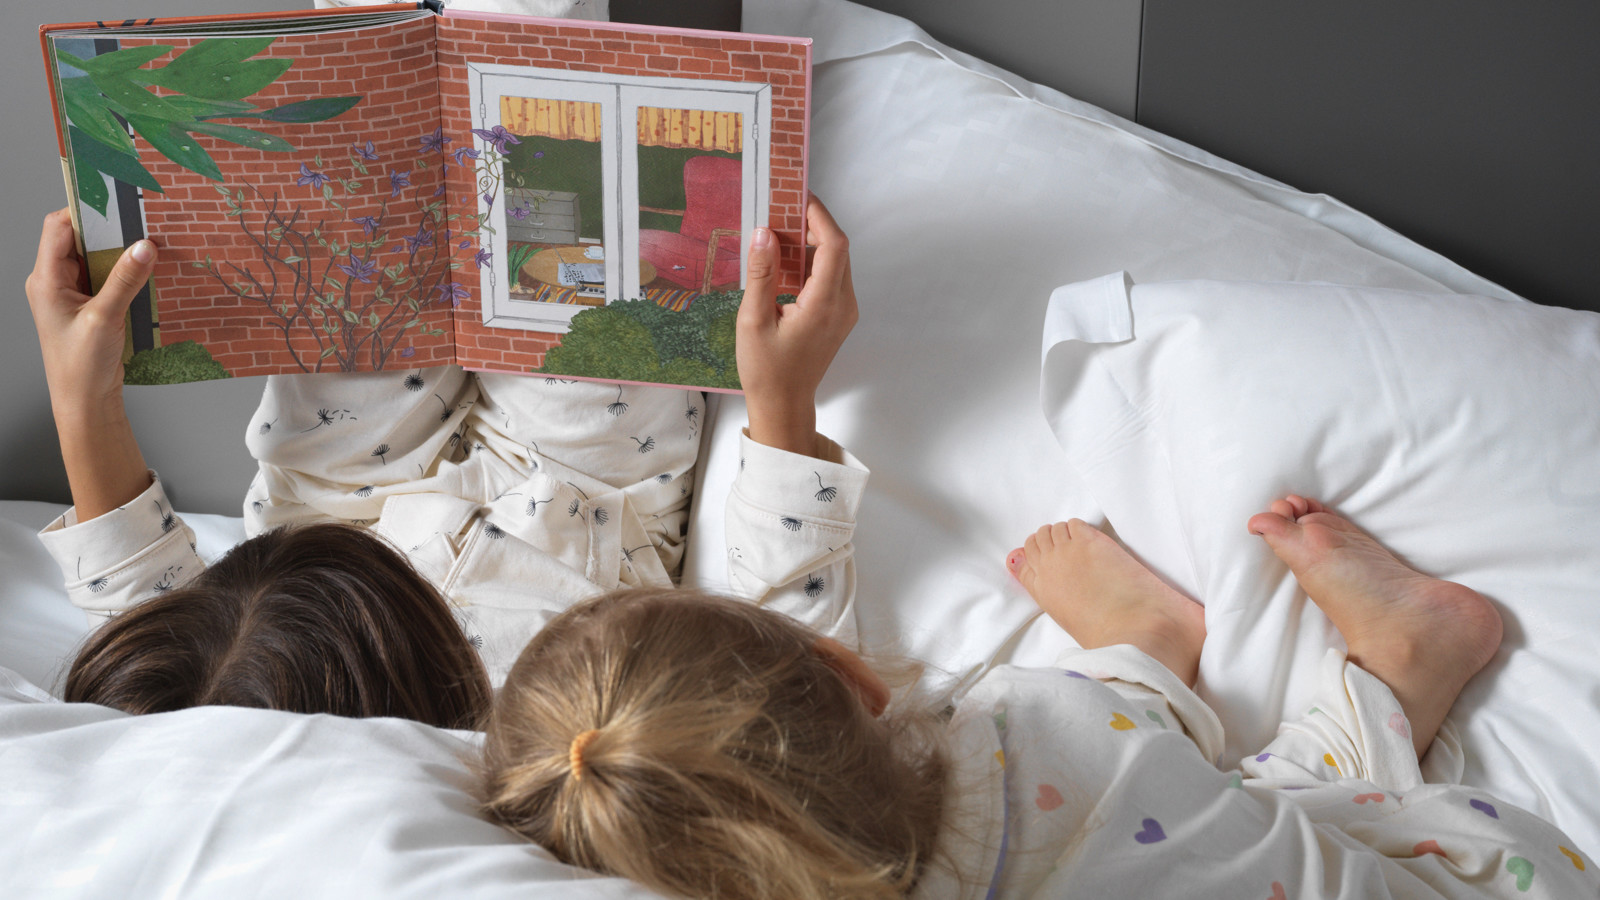 Children reading a book in bed